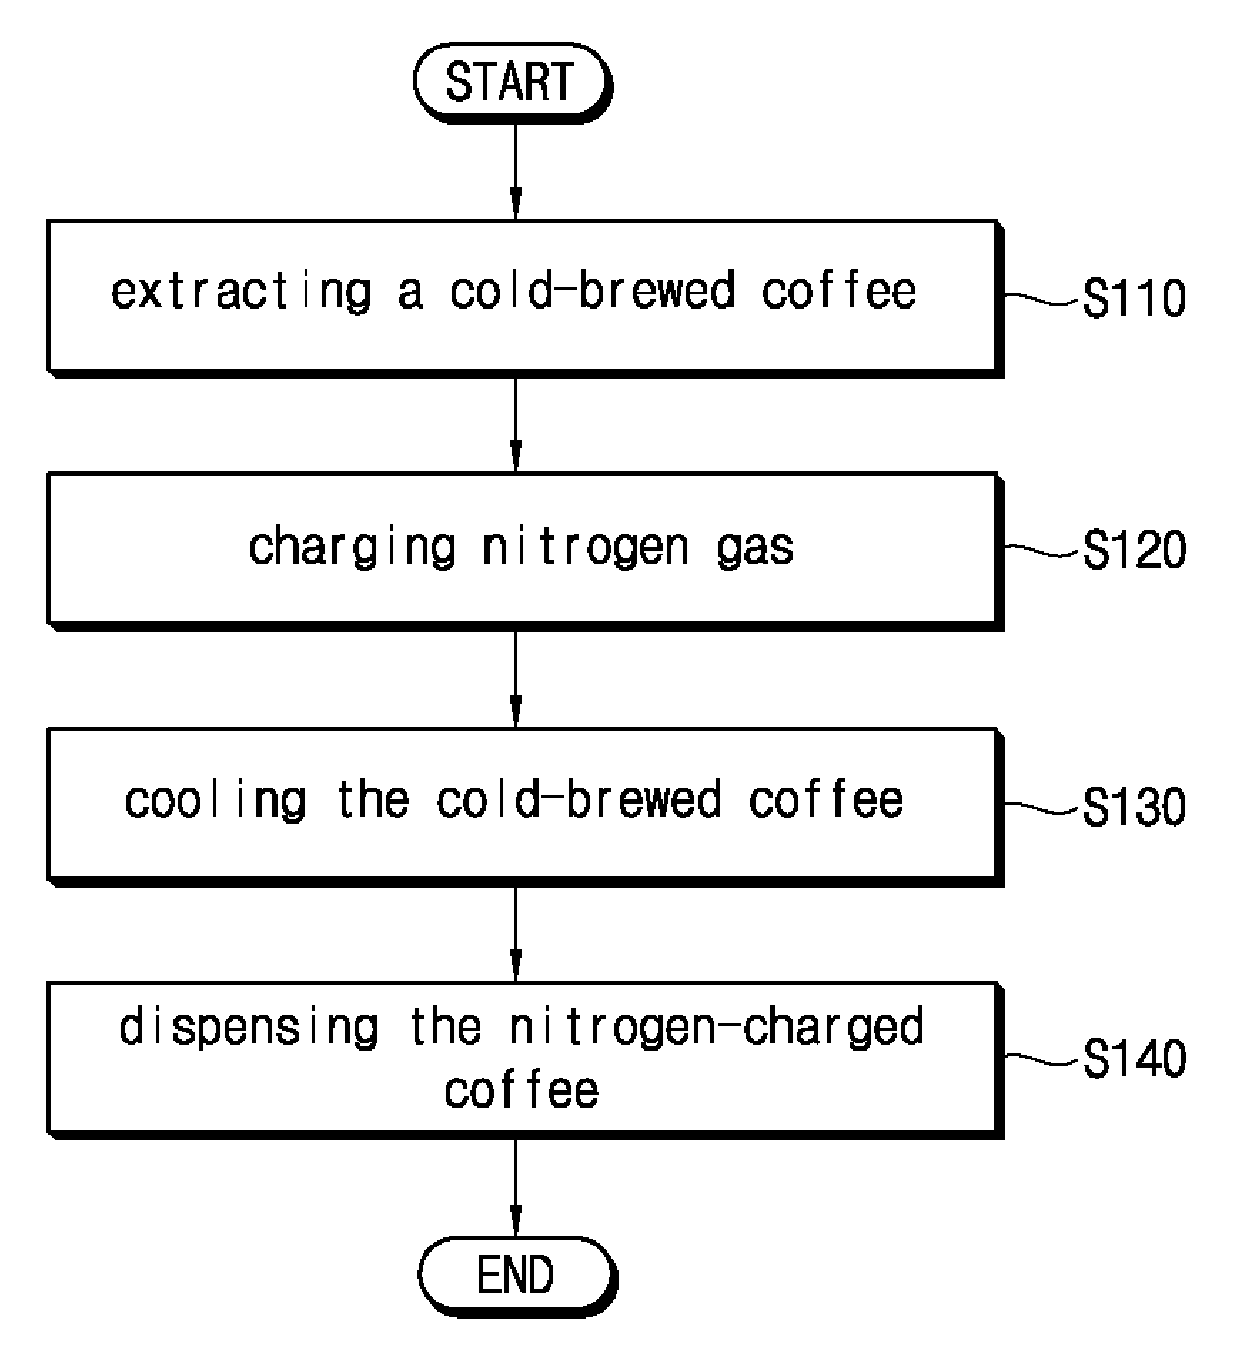 Method of making and dispensing nitrogen-charged coffee